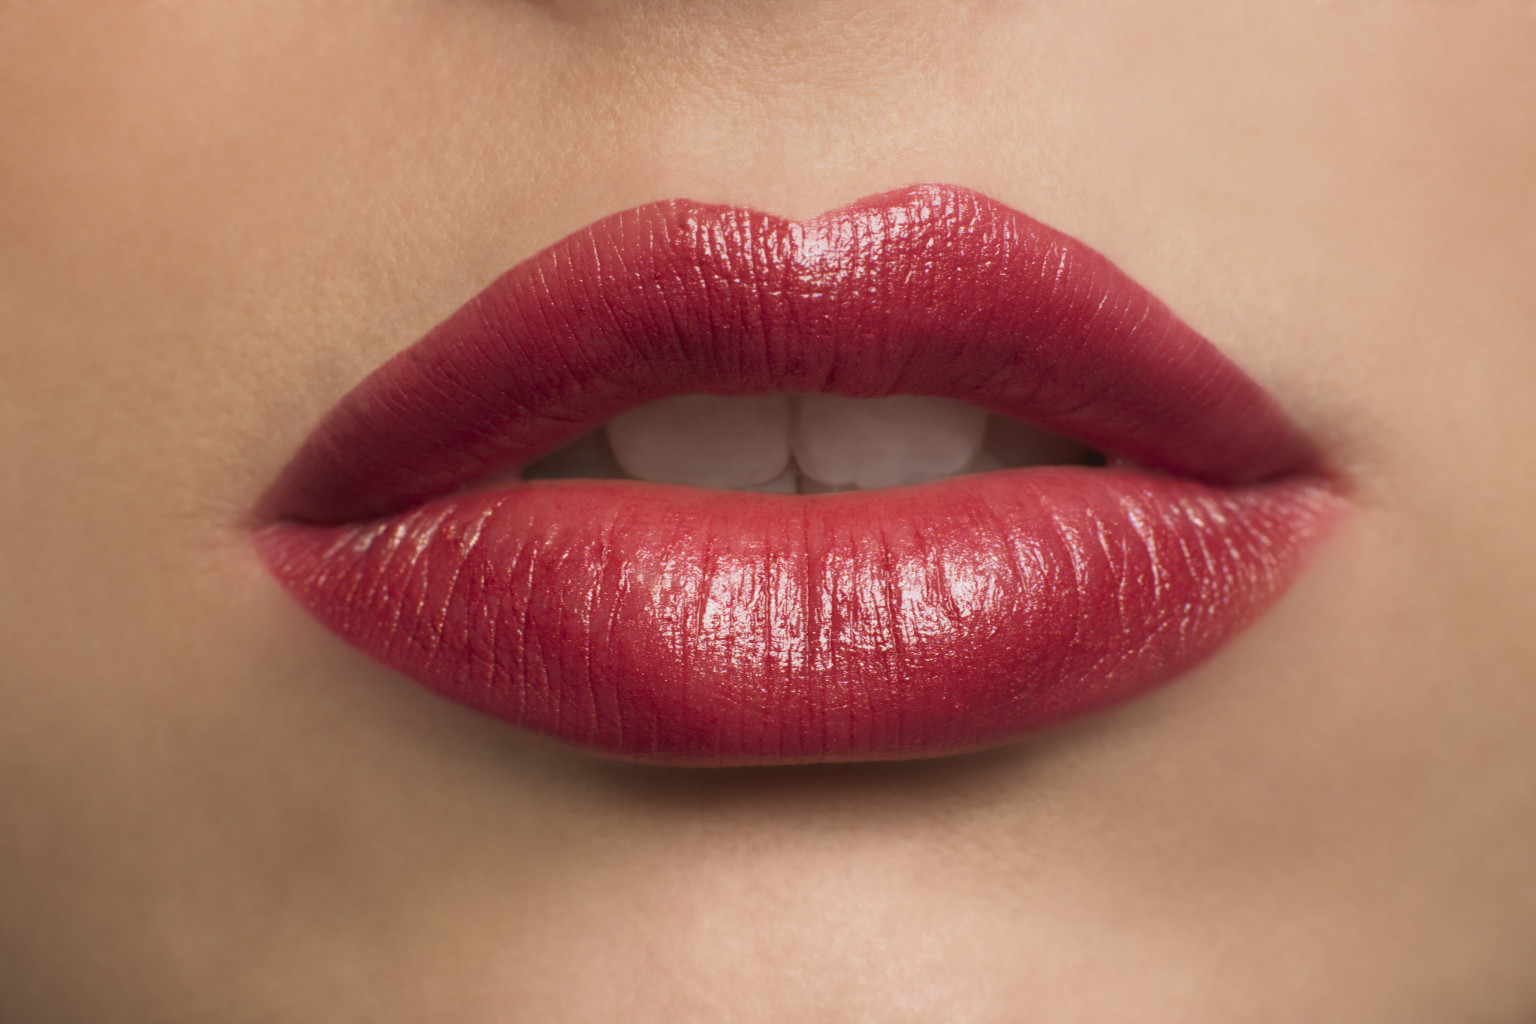 Amazing Facts About Your Lips